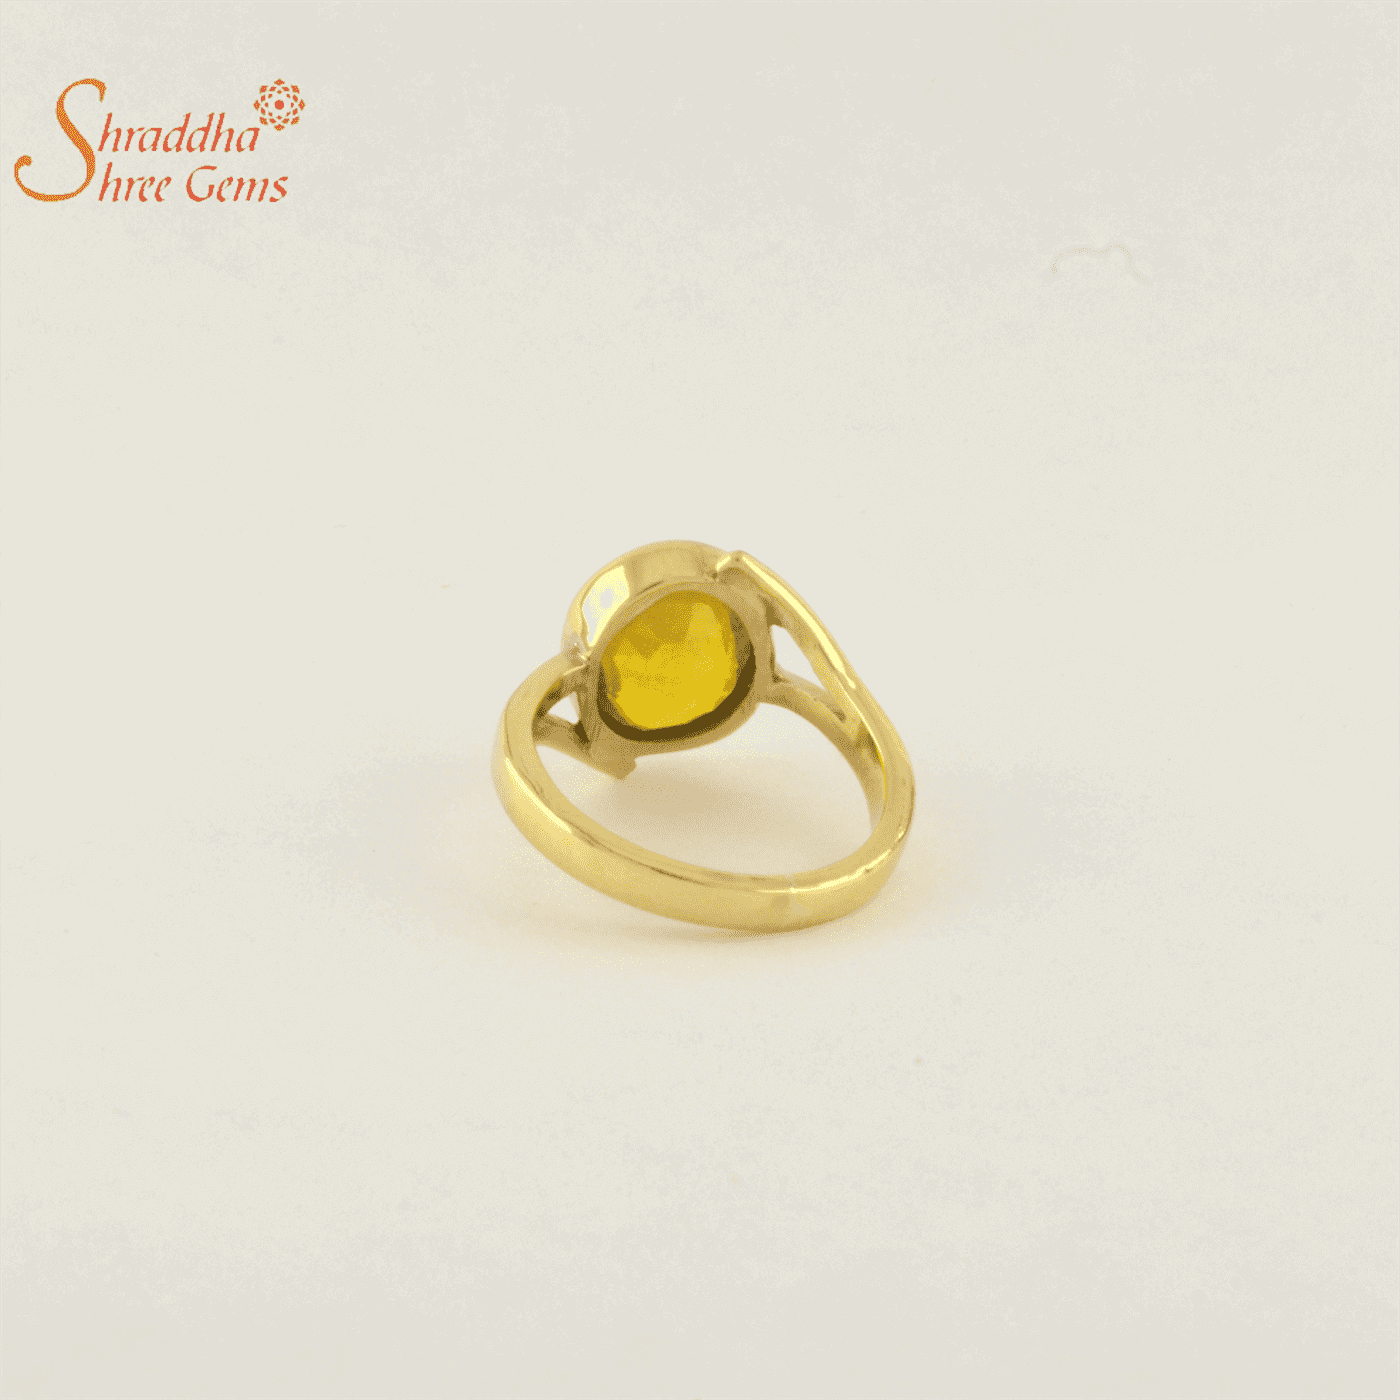 CEYLONMINE Pukhraj stone ring Natural sapphire/yellow sapphire certified  stone unheated & untreated Astrological Purpose for Men & women Stone  Sapphire Gold Plated Ring Price in India - Buy CEYLONMINE Pukhraj stone ring